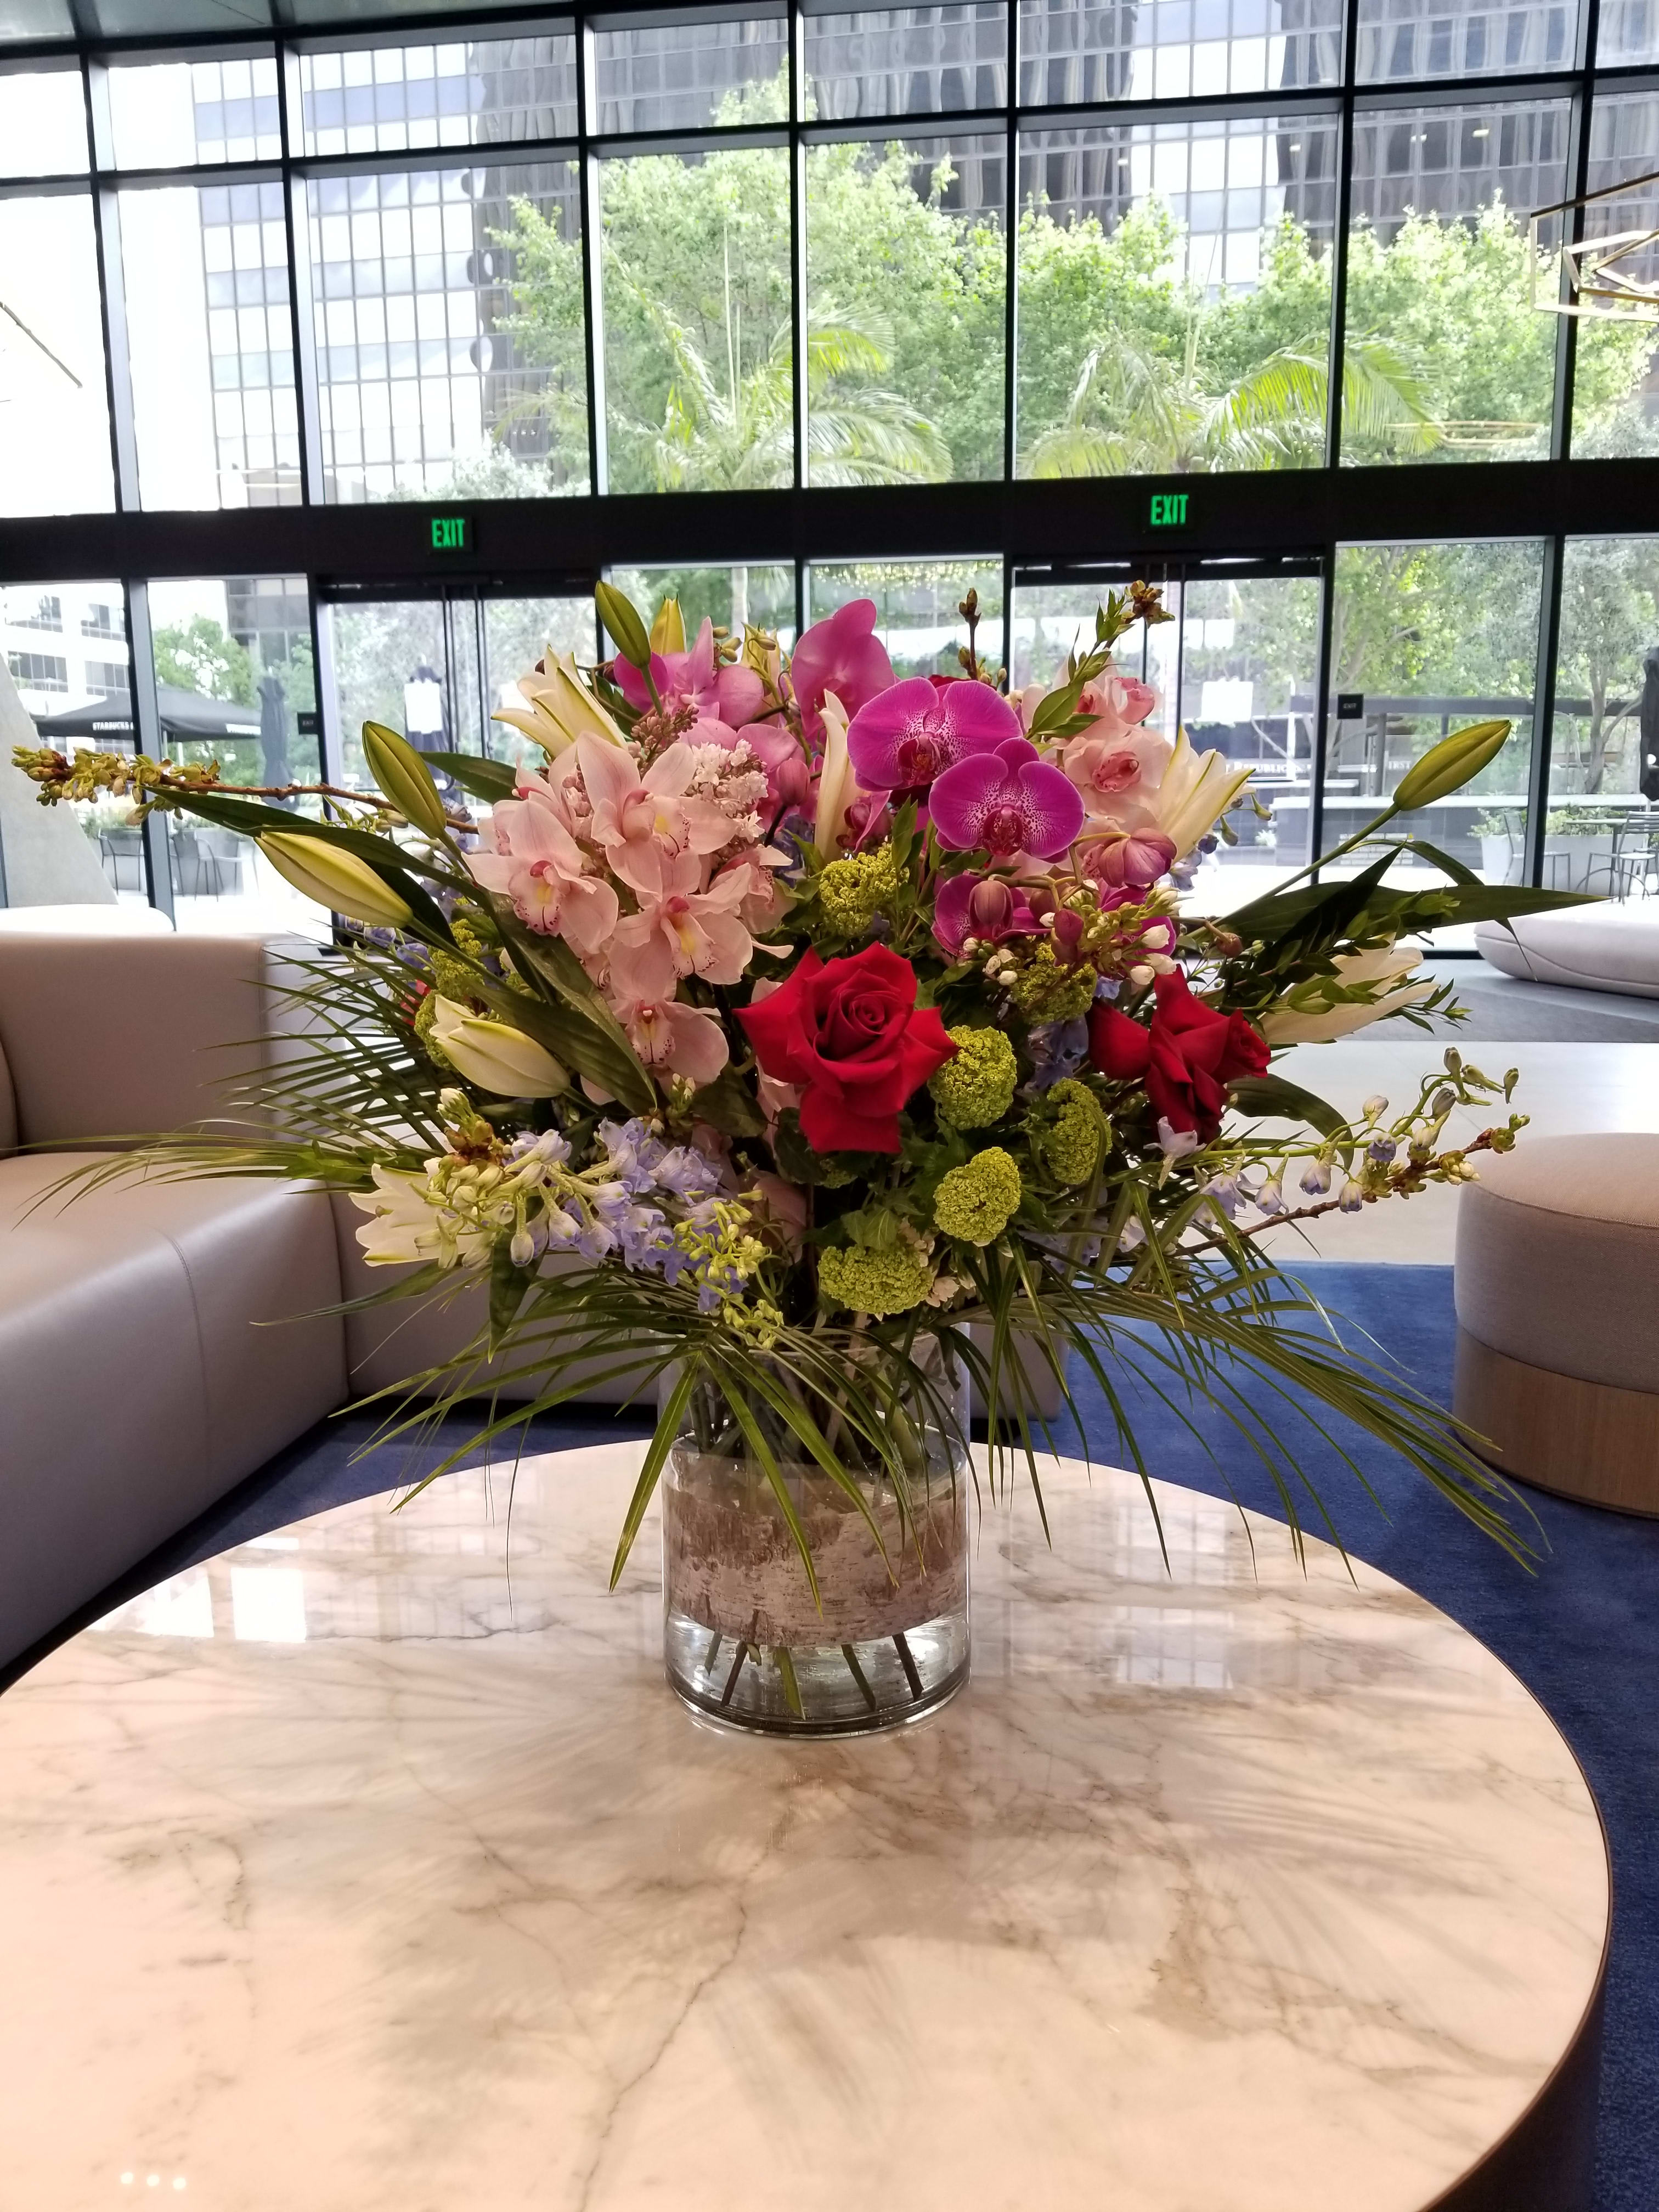 Spring Fairytale - Ode to Spring! Our large sophisticated arrangement filled with blooms in every color. This spring fairytale will keep on blooming and making lasting impressions.